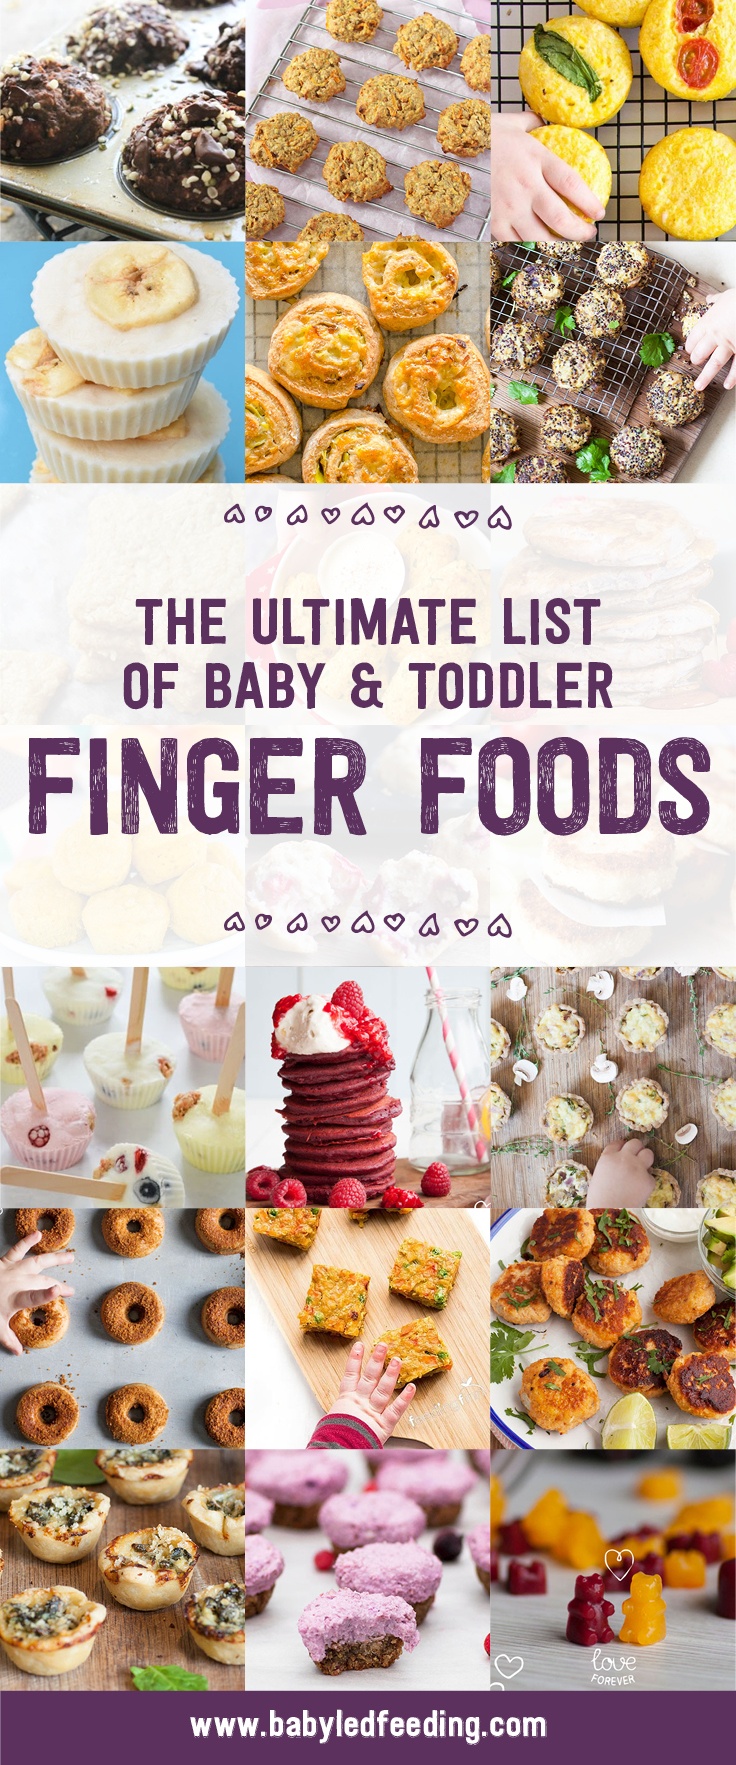 The Ultimate List of Baby and Toddler Finger Foods. Homemade recipe and ideas for baby led weaning. Most recipe are REFINED SUGAR FREE and LOW SALT. Easy recipe, healthy recipe, and family recipe even for the PICKY EATER! Simple ideas for breakfast, lunch, dinner, and snacks. This list includes hidden veggies, juicy fruit, sweet and savory! You'll even fins some VEGAN and DAIRY FREE options! #fingerfood #fingerfoods #babyledweaning #babyledfeeding #babyfood #refinedsugarfree